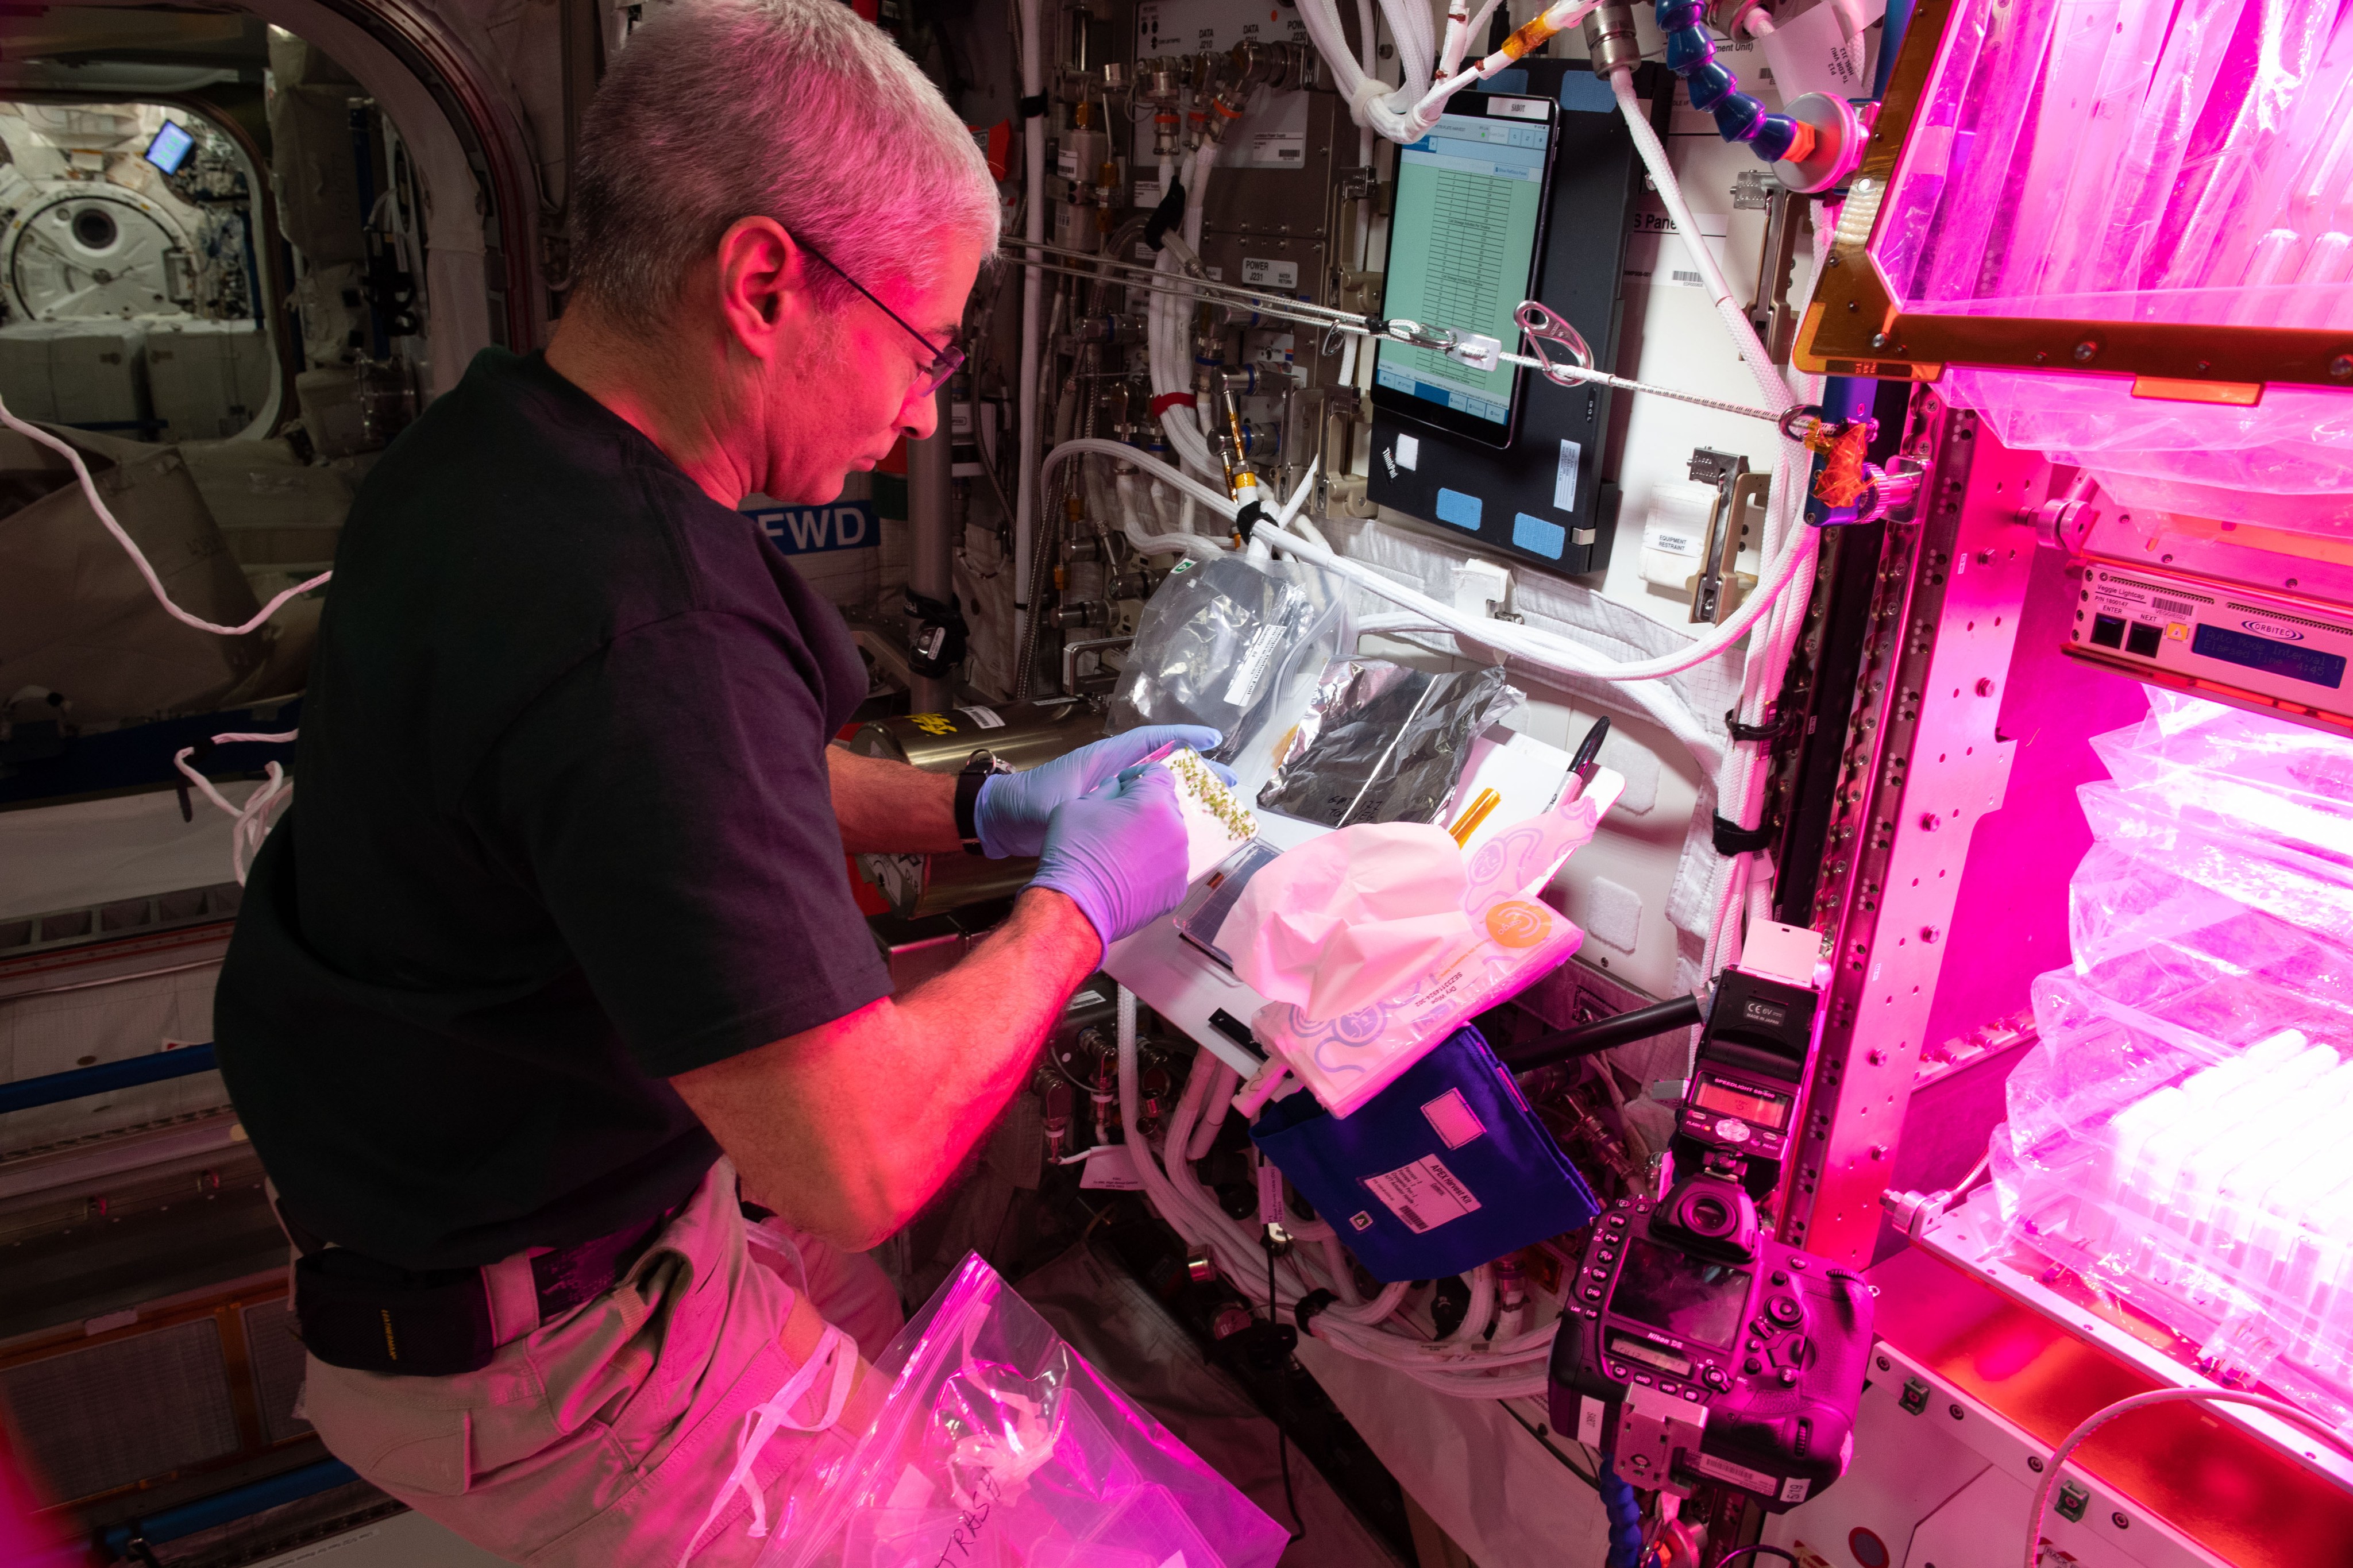 A man wearing a black t-shirt and light-colored pants handles plant samples on the International Space Station. Pink, fluorescent lights illuminate him.